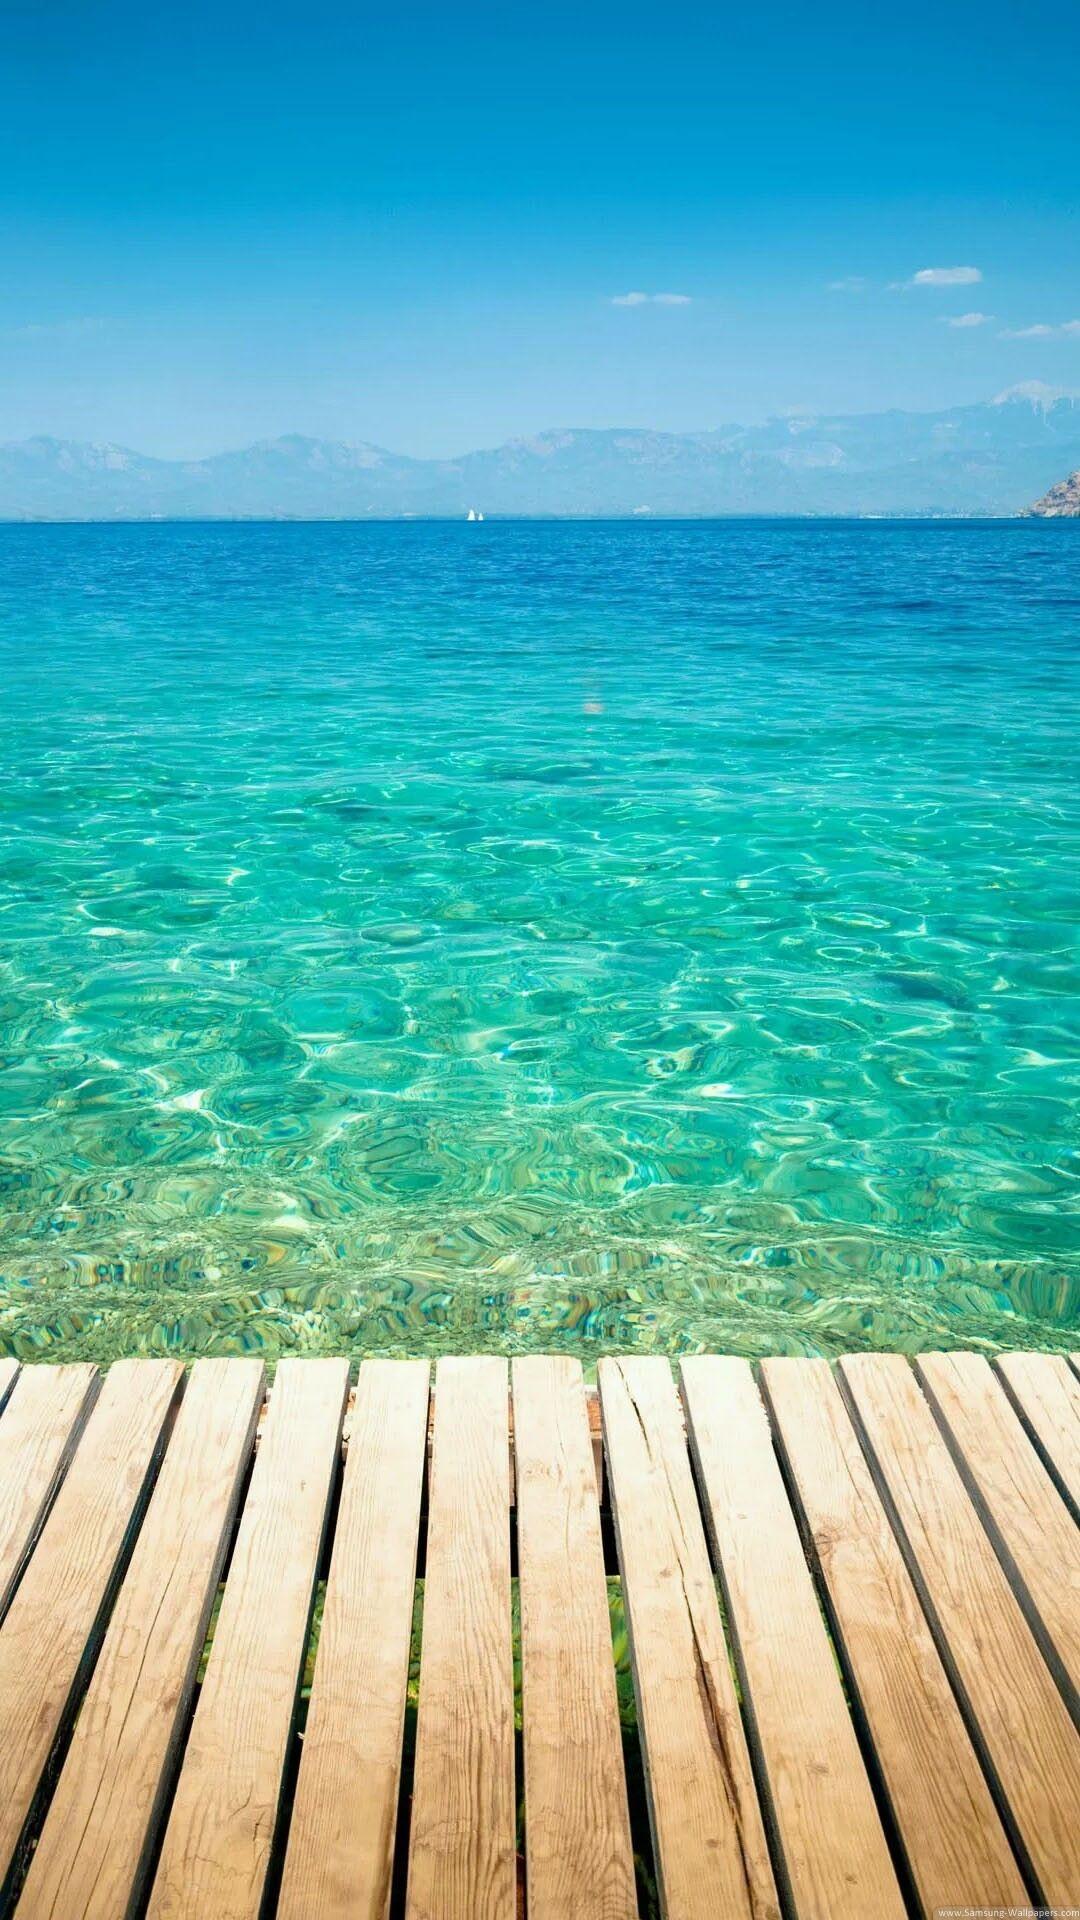 Beach iPhone Wallpapers - Top Free Beach iPhone Backgrounds